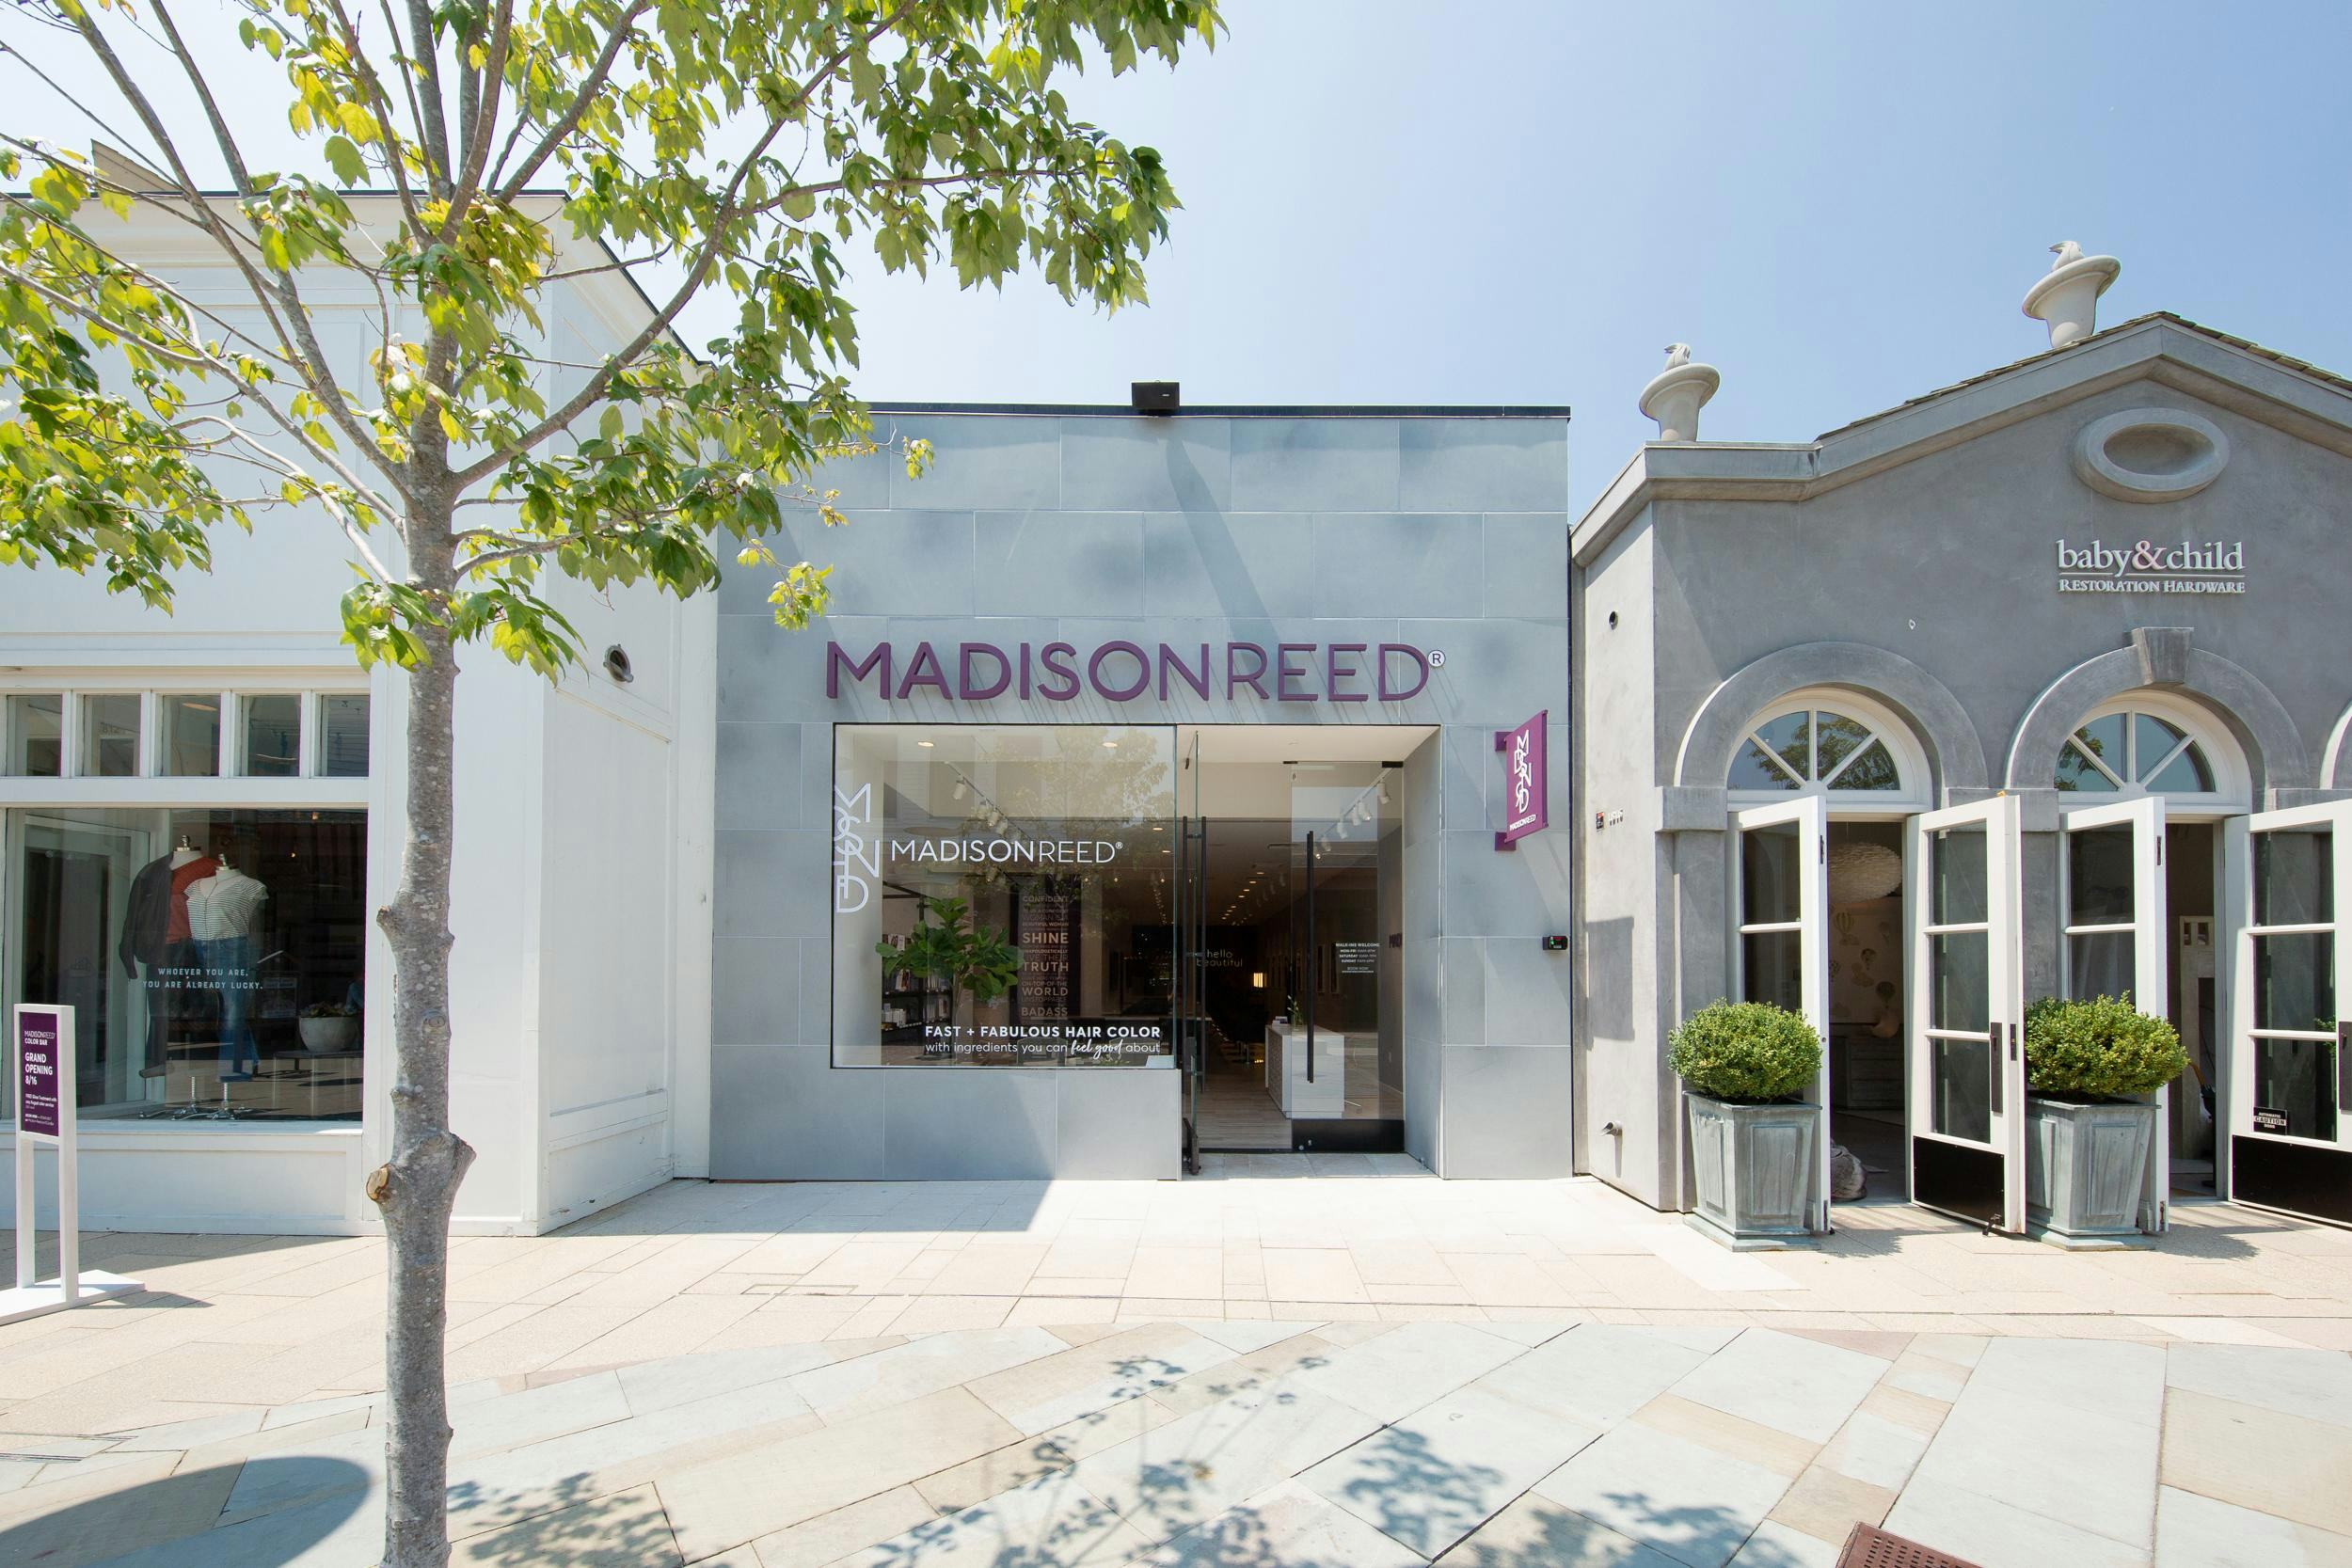 The Madison Reed Corte Madera Hair Color Bar in SF Bay Area, California